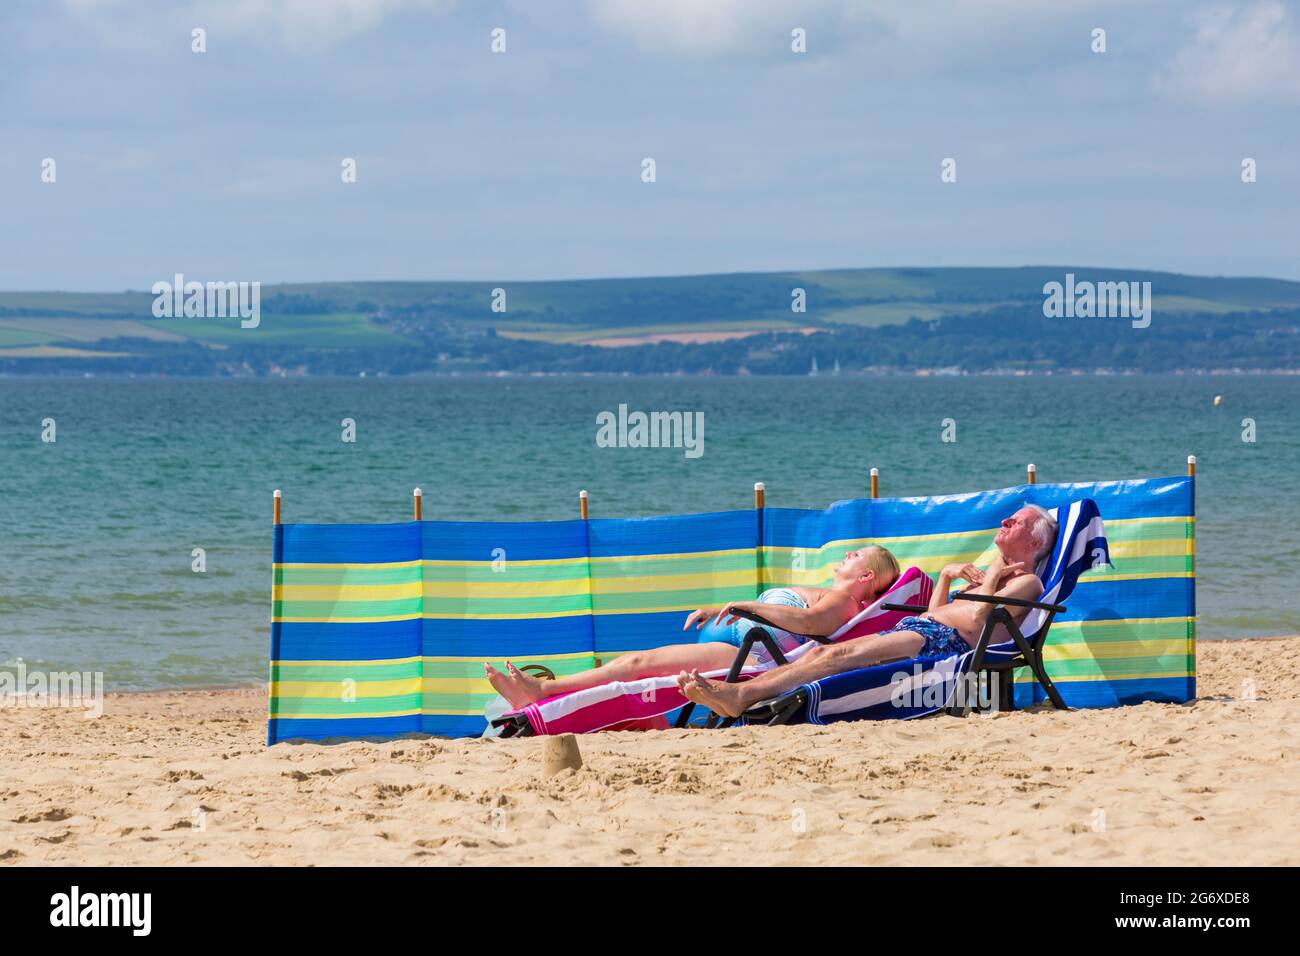 Bournemouth, Dorset UK. 9th July 2021. UK weather: lovely warm sunny, but humid day at Bournemouth beaches, as sunseekers head to the seaside to enjoy the sunshine. Mature couple sunbathing on sunloungers  with windbreak wind break windbreaker on sand on beach. Credit: Carolyn Jenkins/Alamy Live News Stock Photo